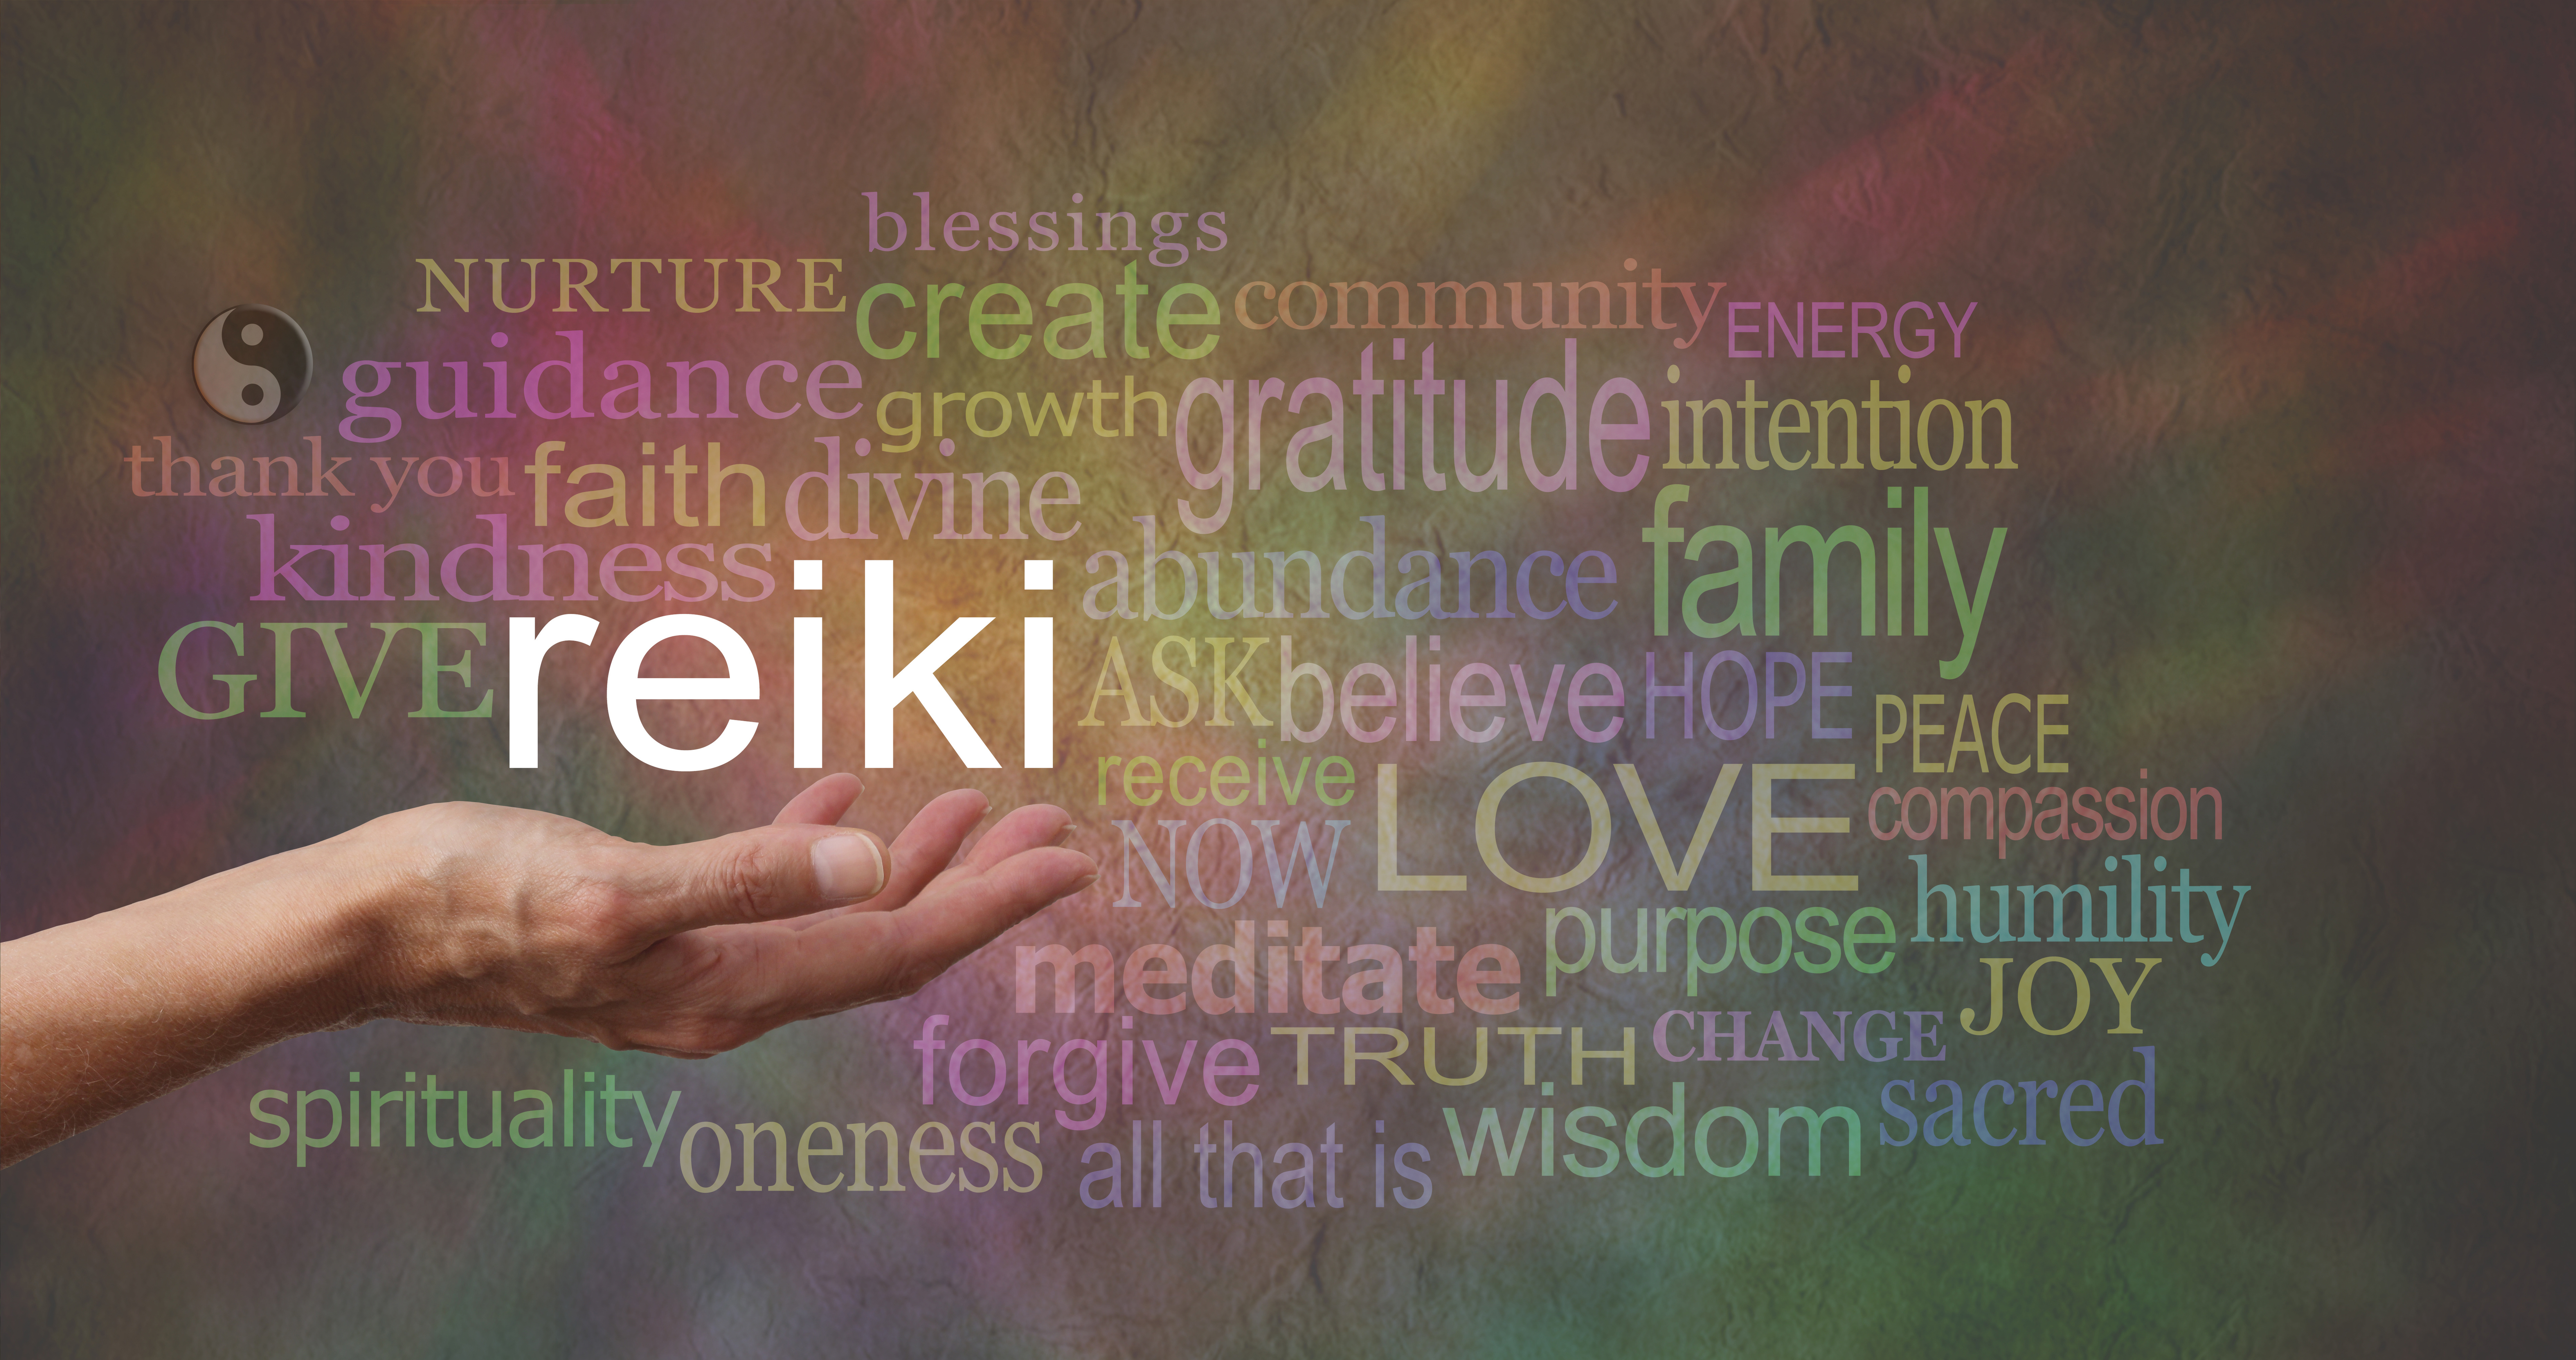 Reiki - Does It Fit with Naturopathic Medicine?